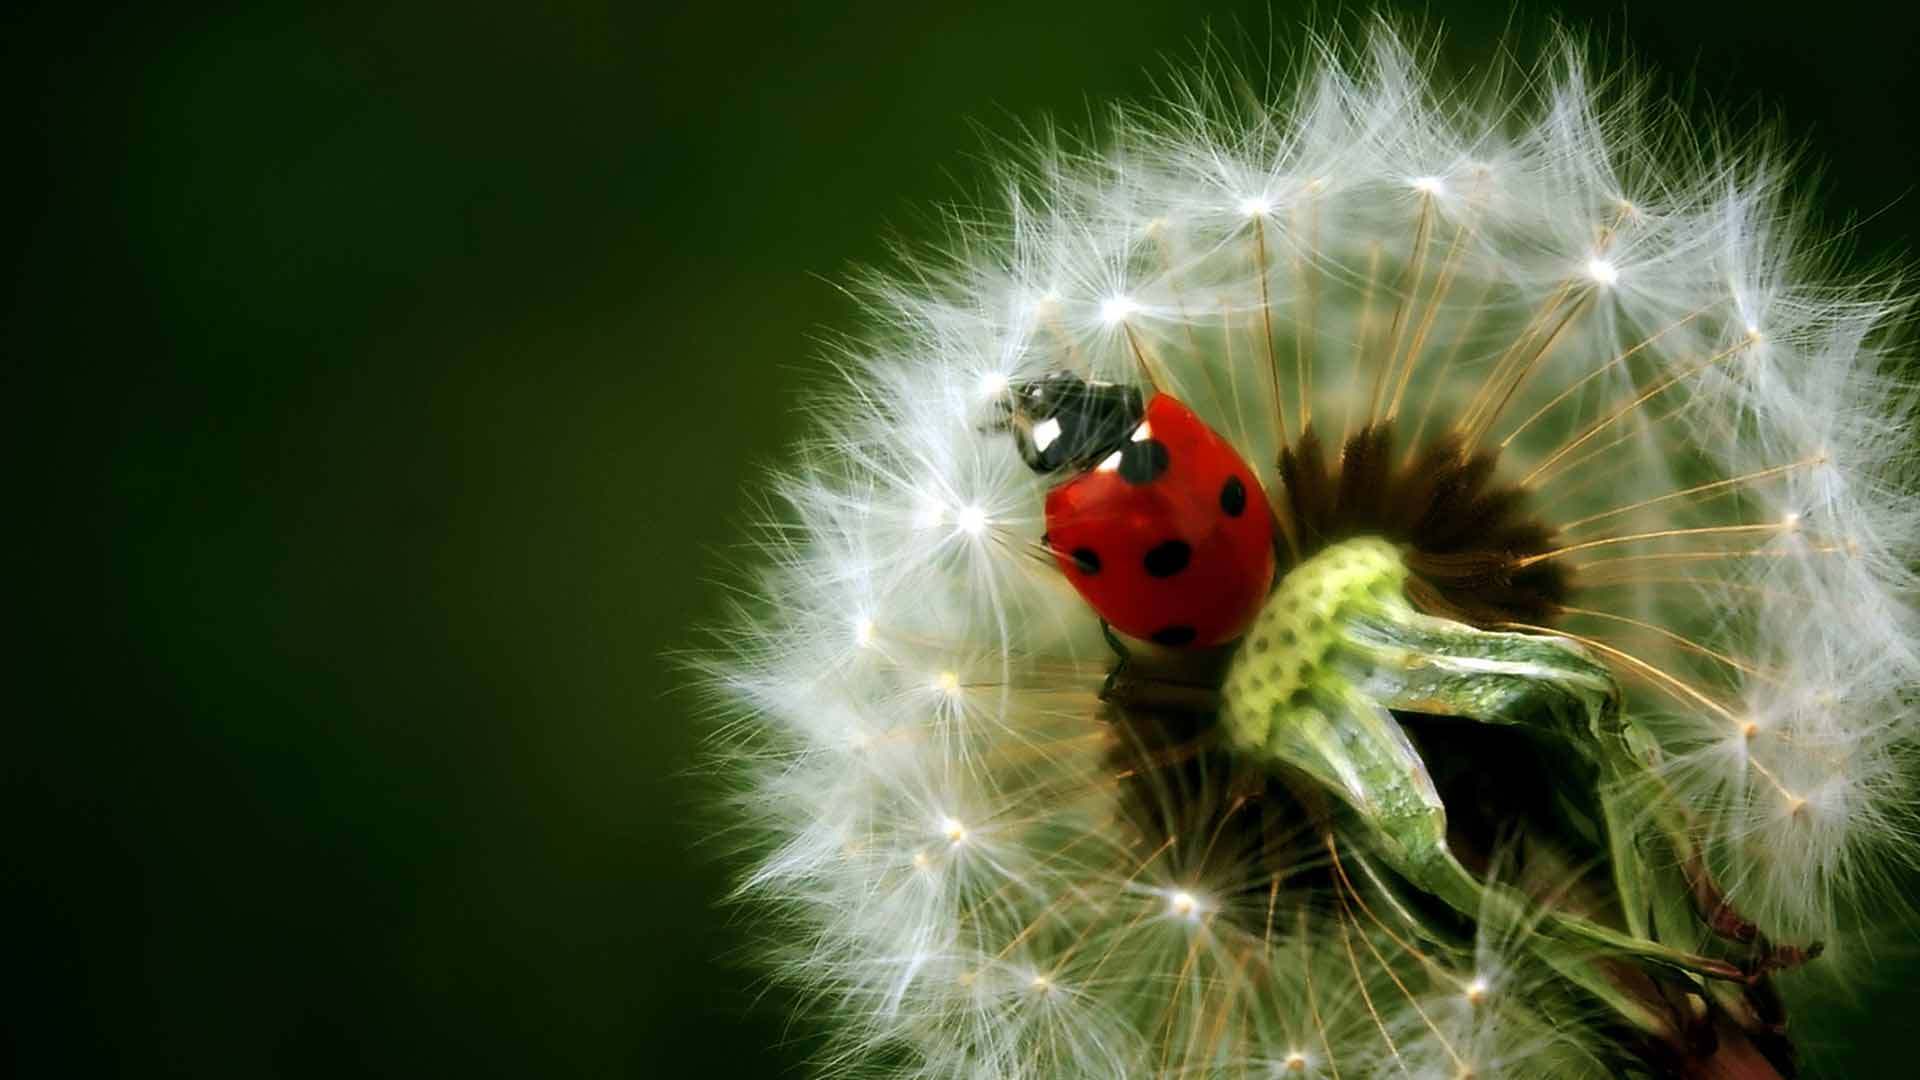 plants, flowers, insects, dandelions, ladybugs cellphone